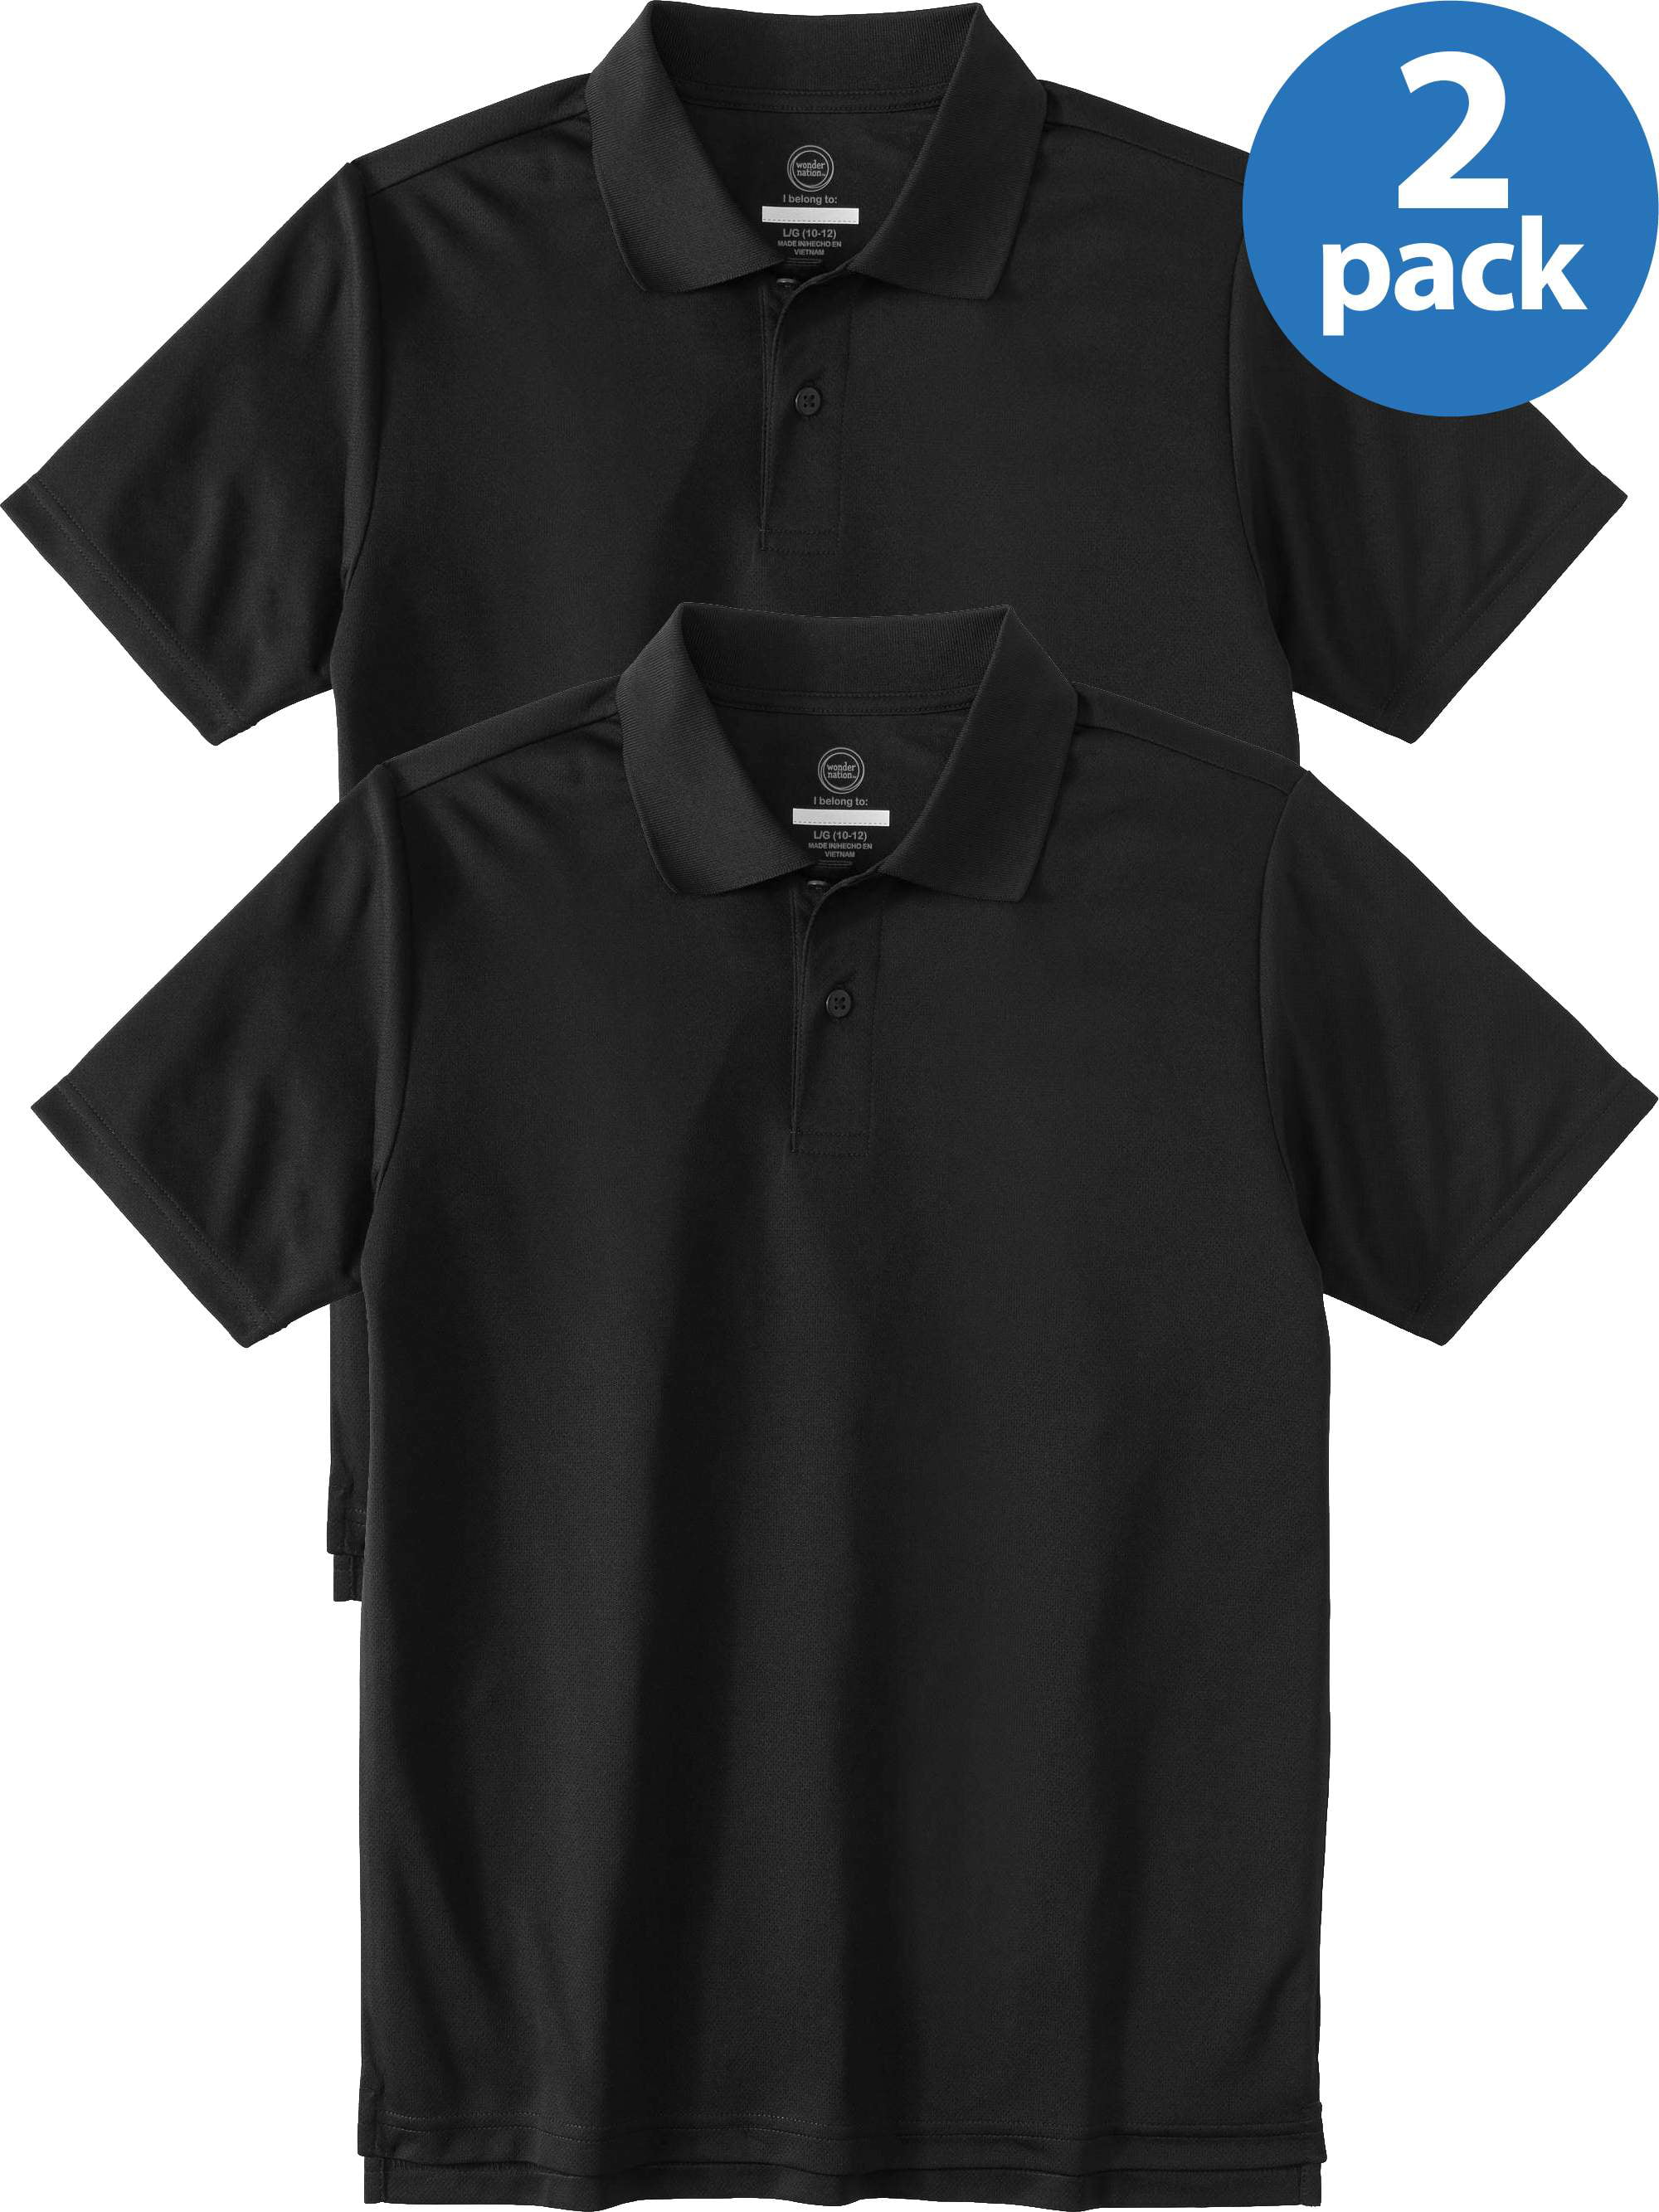 Age 4-12Years Kid Nation Kids 2 Packs Short-Sleeve Performance Polo Shirt for Boys or Girls